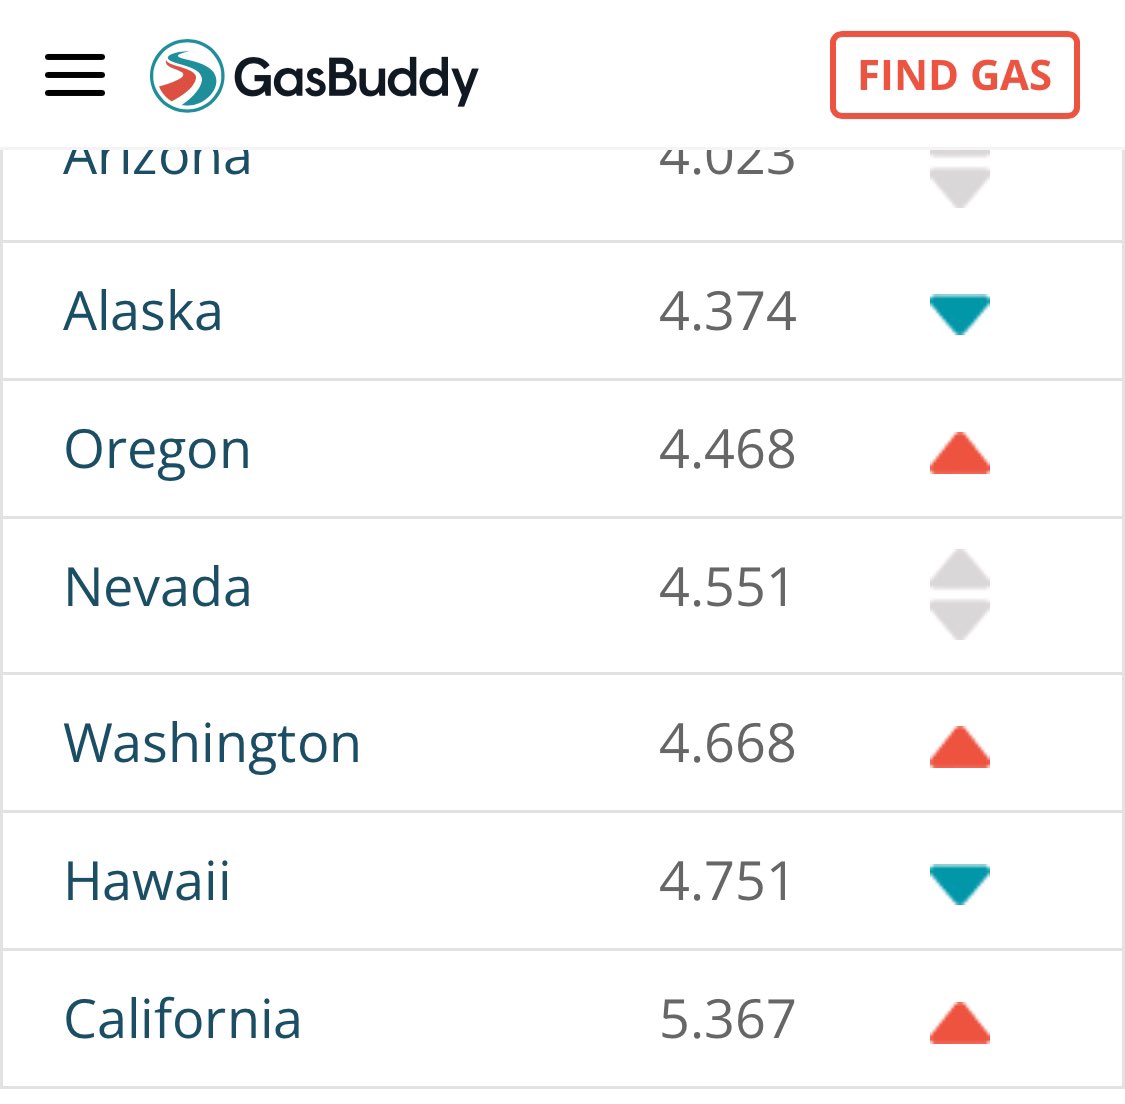 Just now, it cost me $75 to fill up my gas tank at Costco in Roseville, CA

CA politicians call the oil companies greedy while they take over 50¢ in taxes per gallon 

We produce gas in California. Hawaii has their gas imported and we still pay more.

Repeal the greedy gas tax